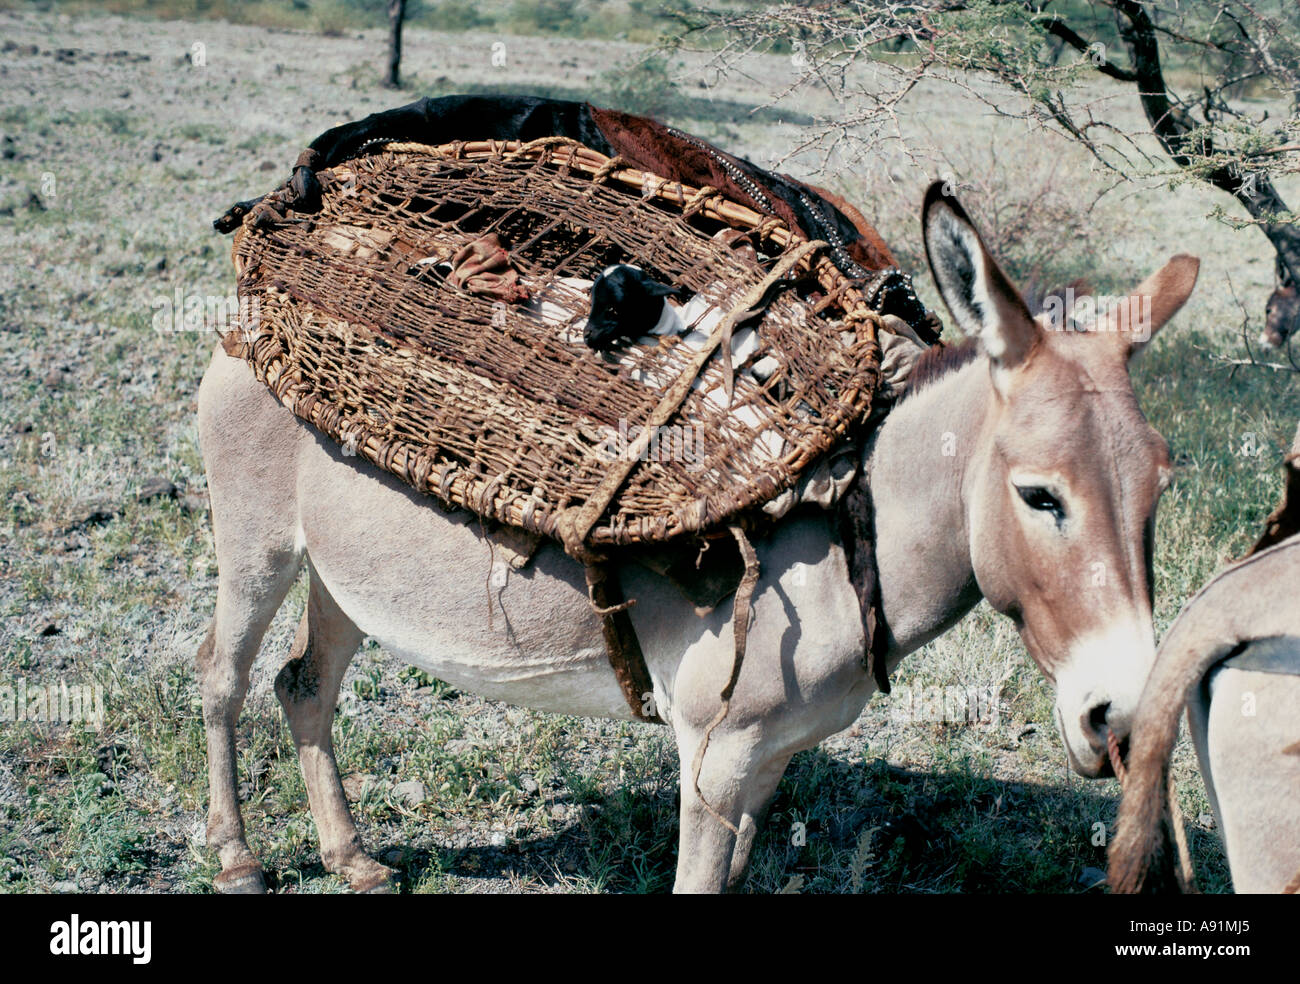 Donkey owned by Turkana people carrying a baby goat Stock Photo